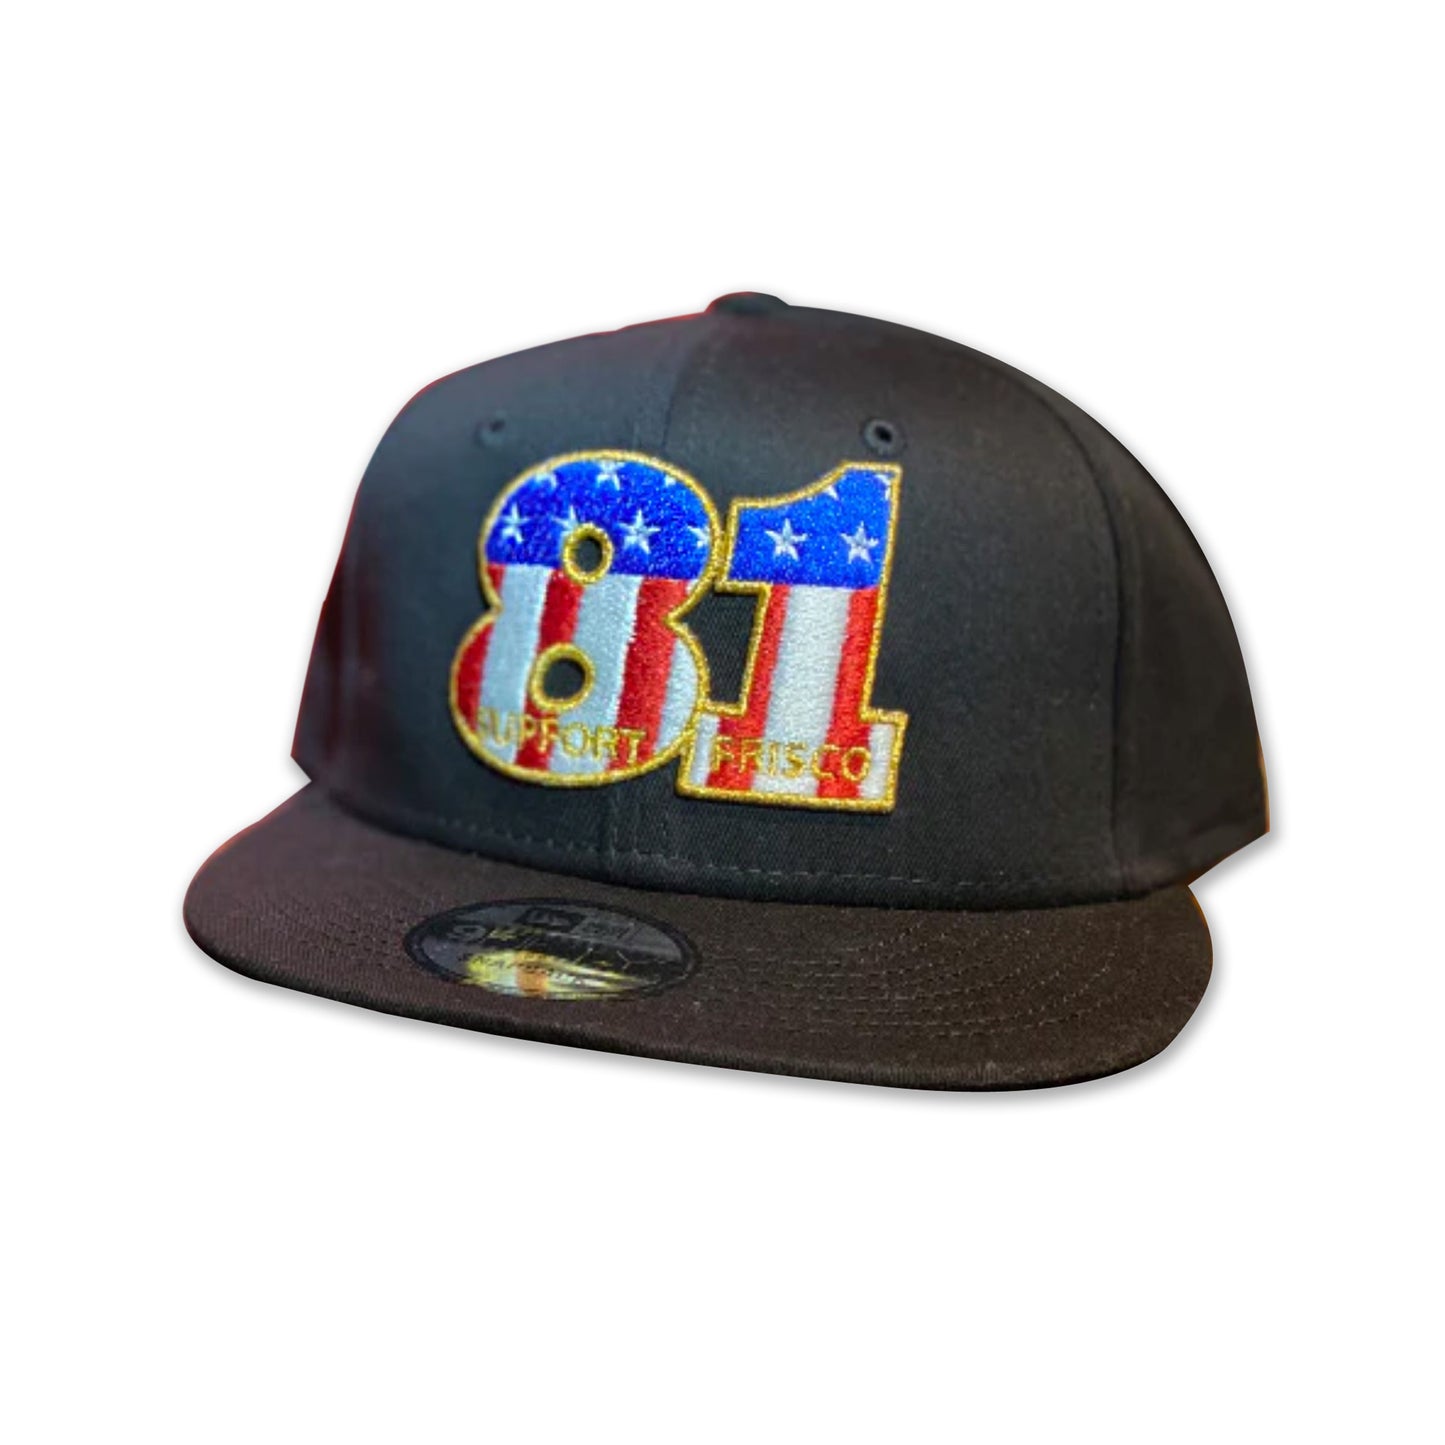 Hat - LIMITED EDITION - Black - Snapback - Support 81